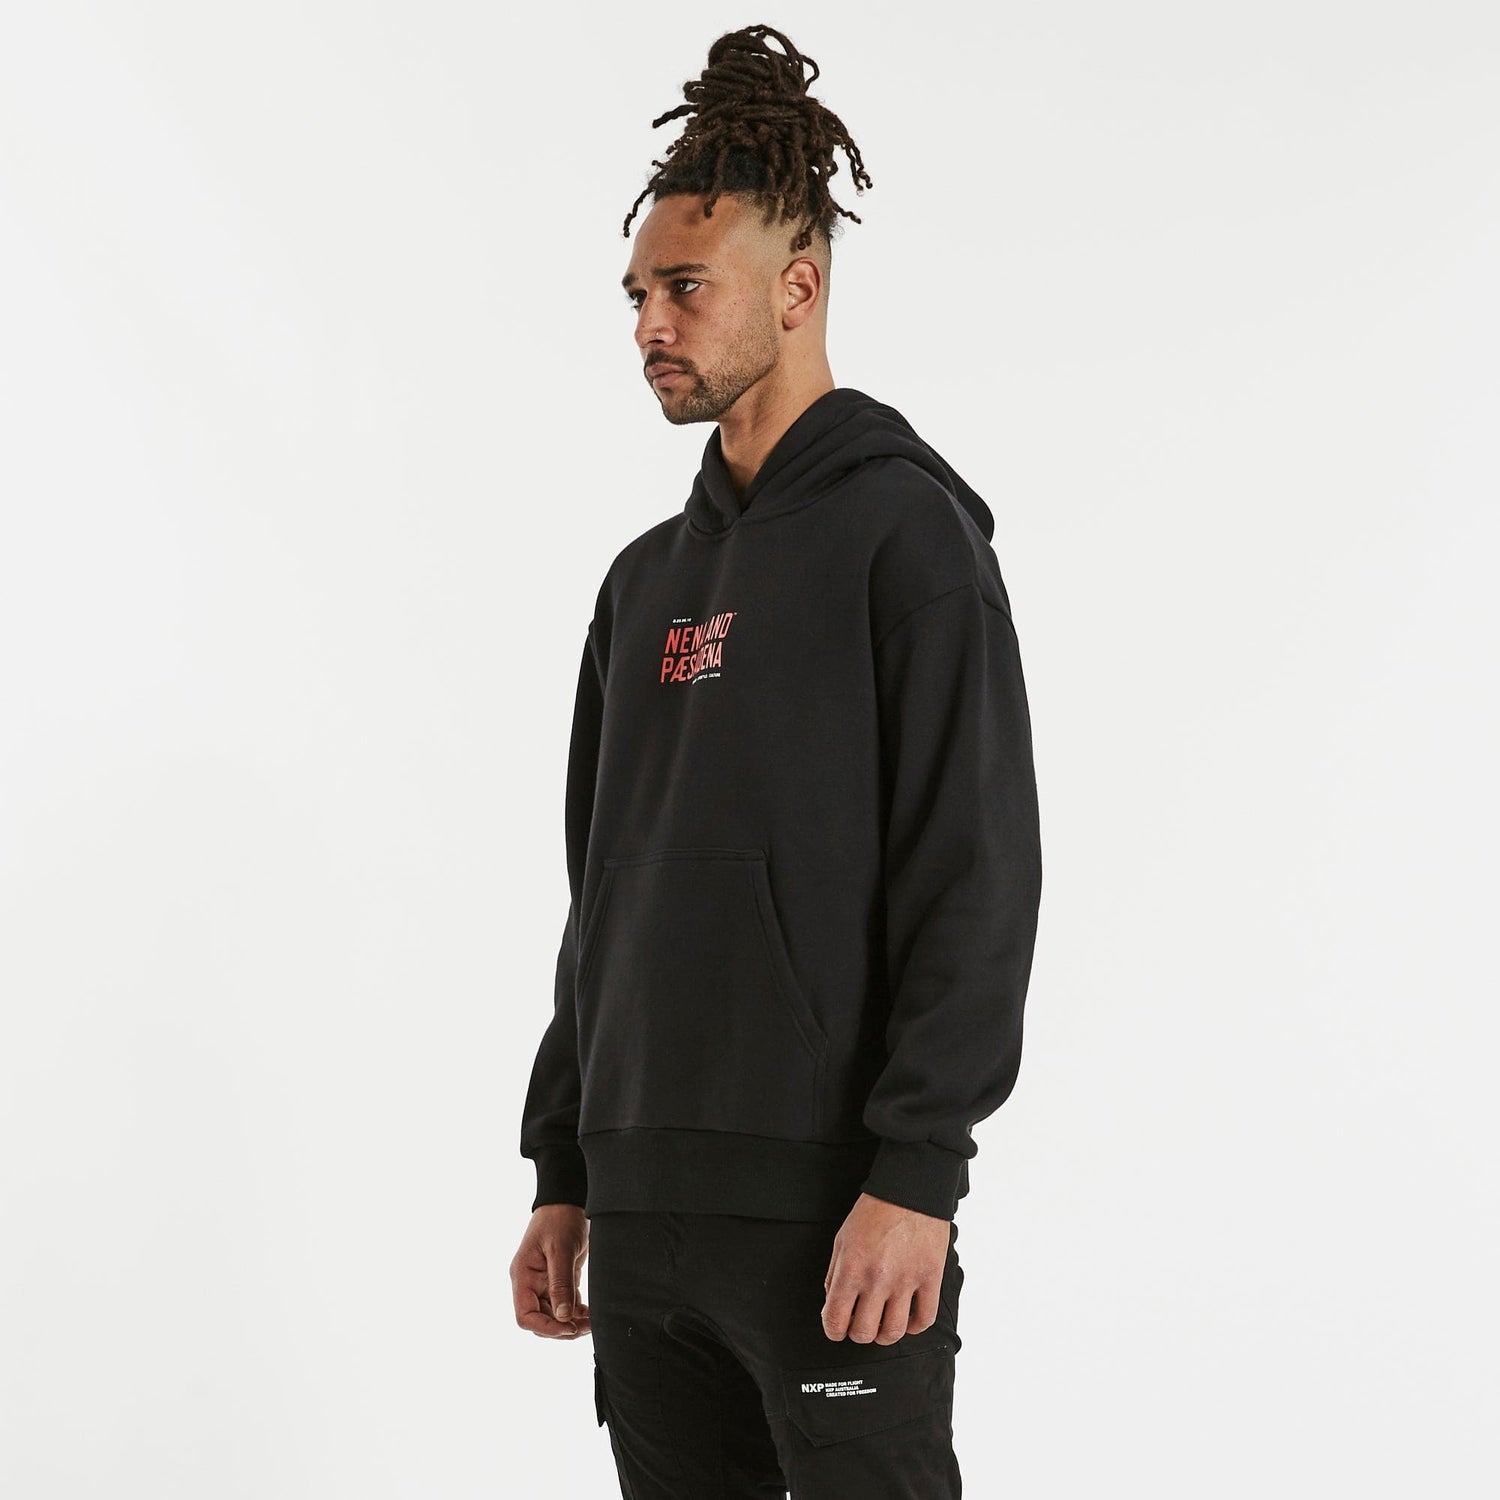 Encryption Relaxed Hoodie Jet Black